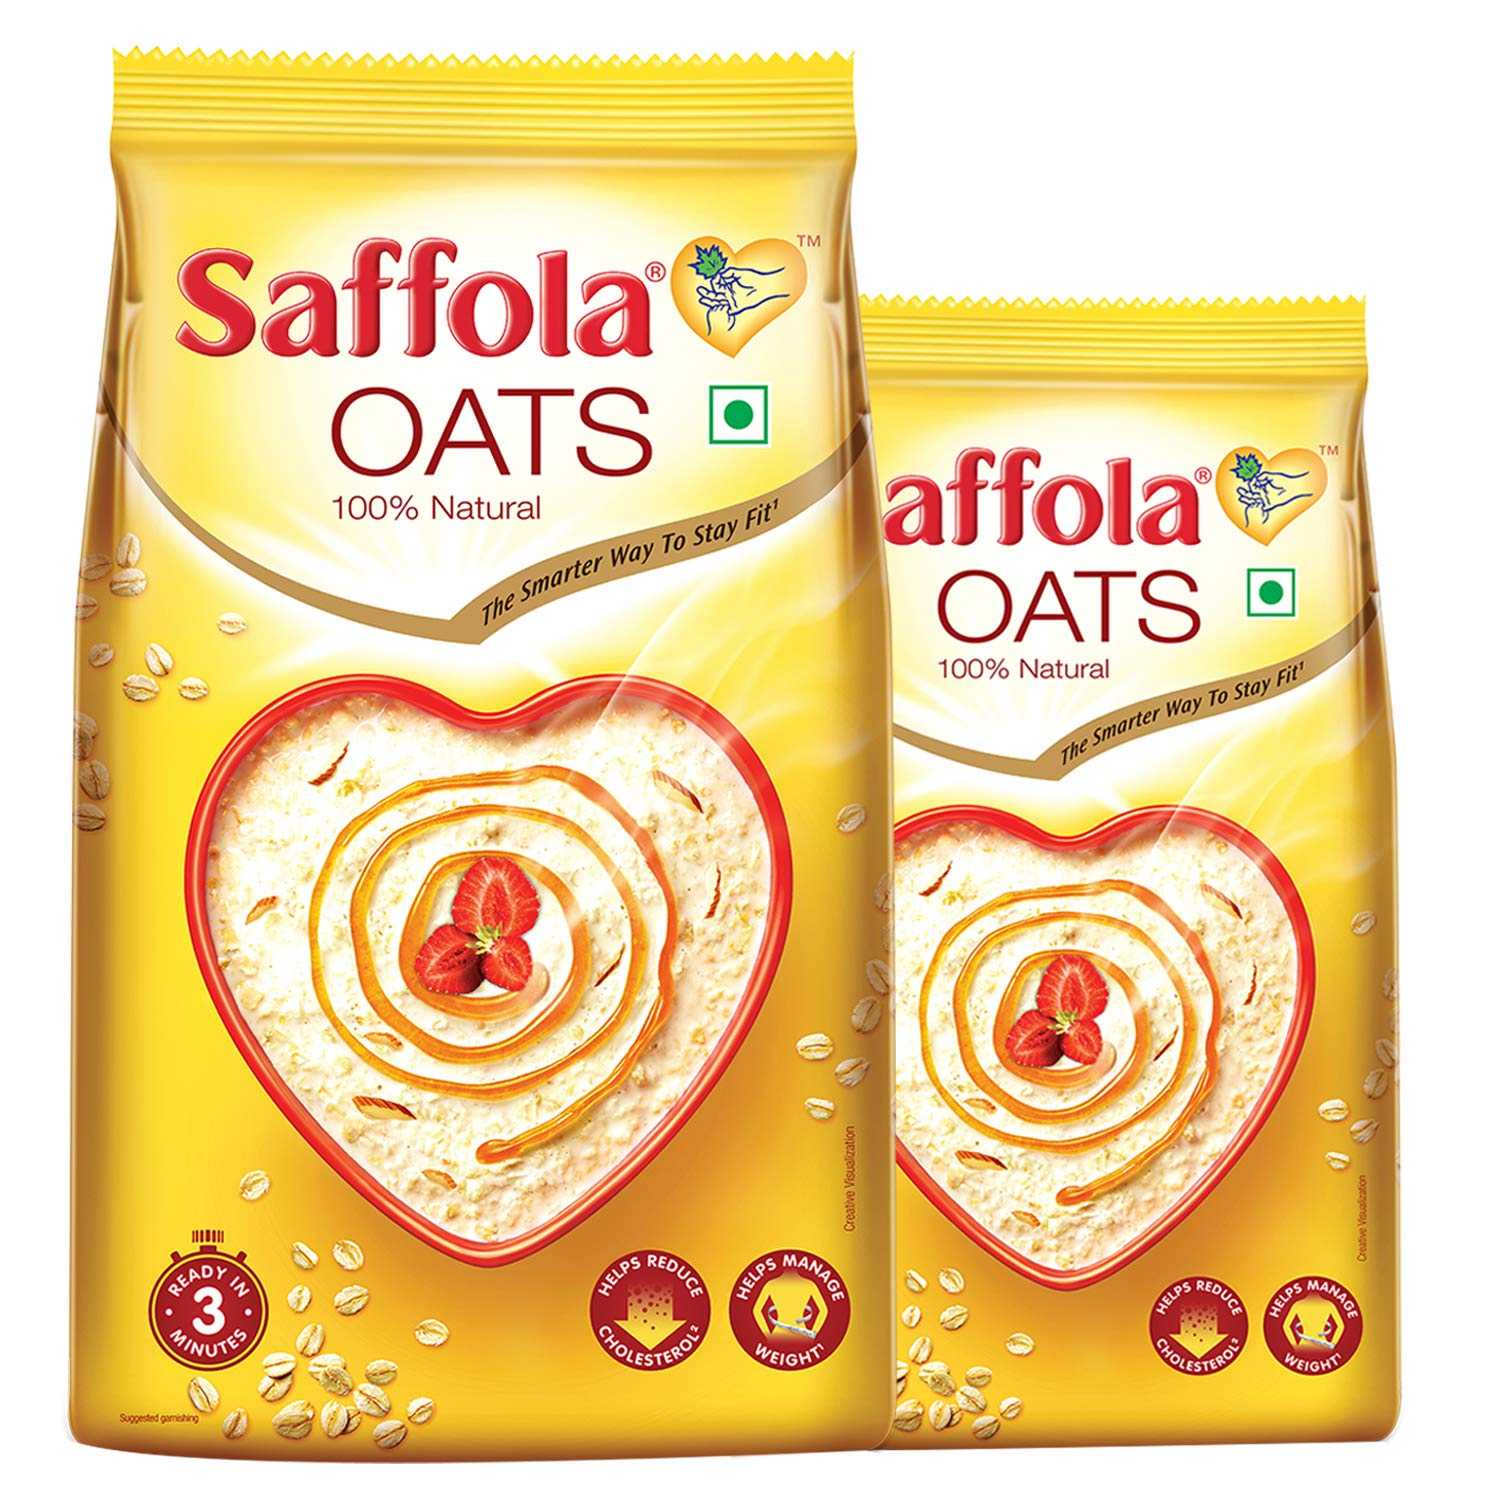 Saffola Oats, 1kg with Free Oats 400gm